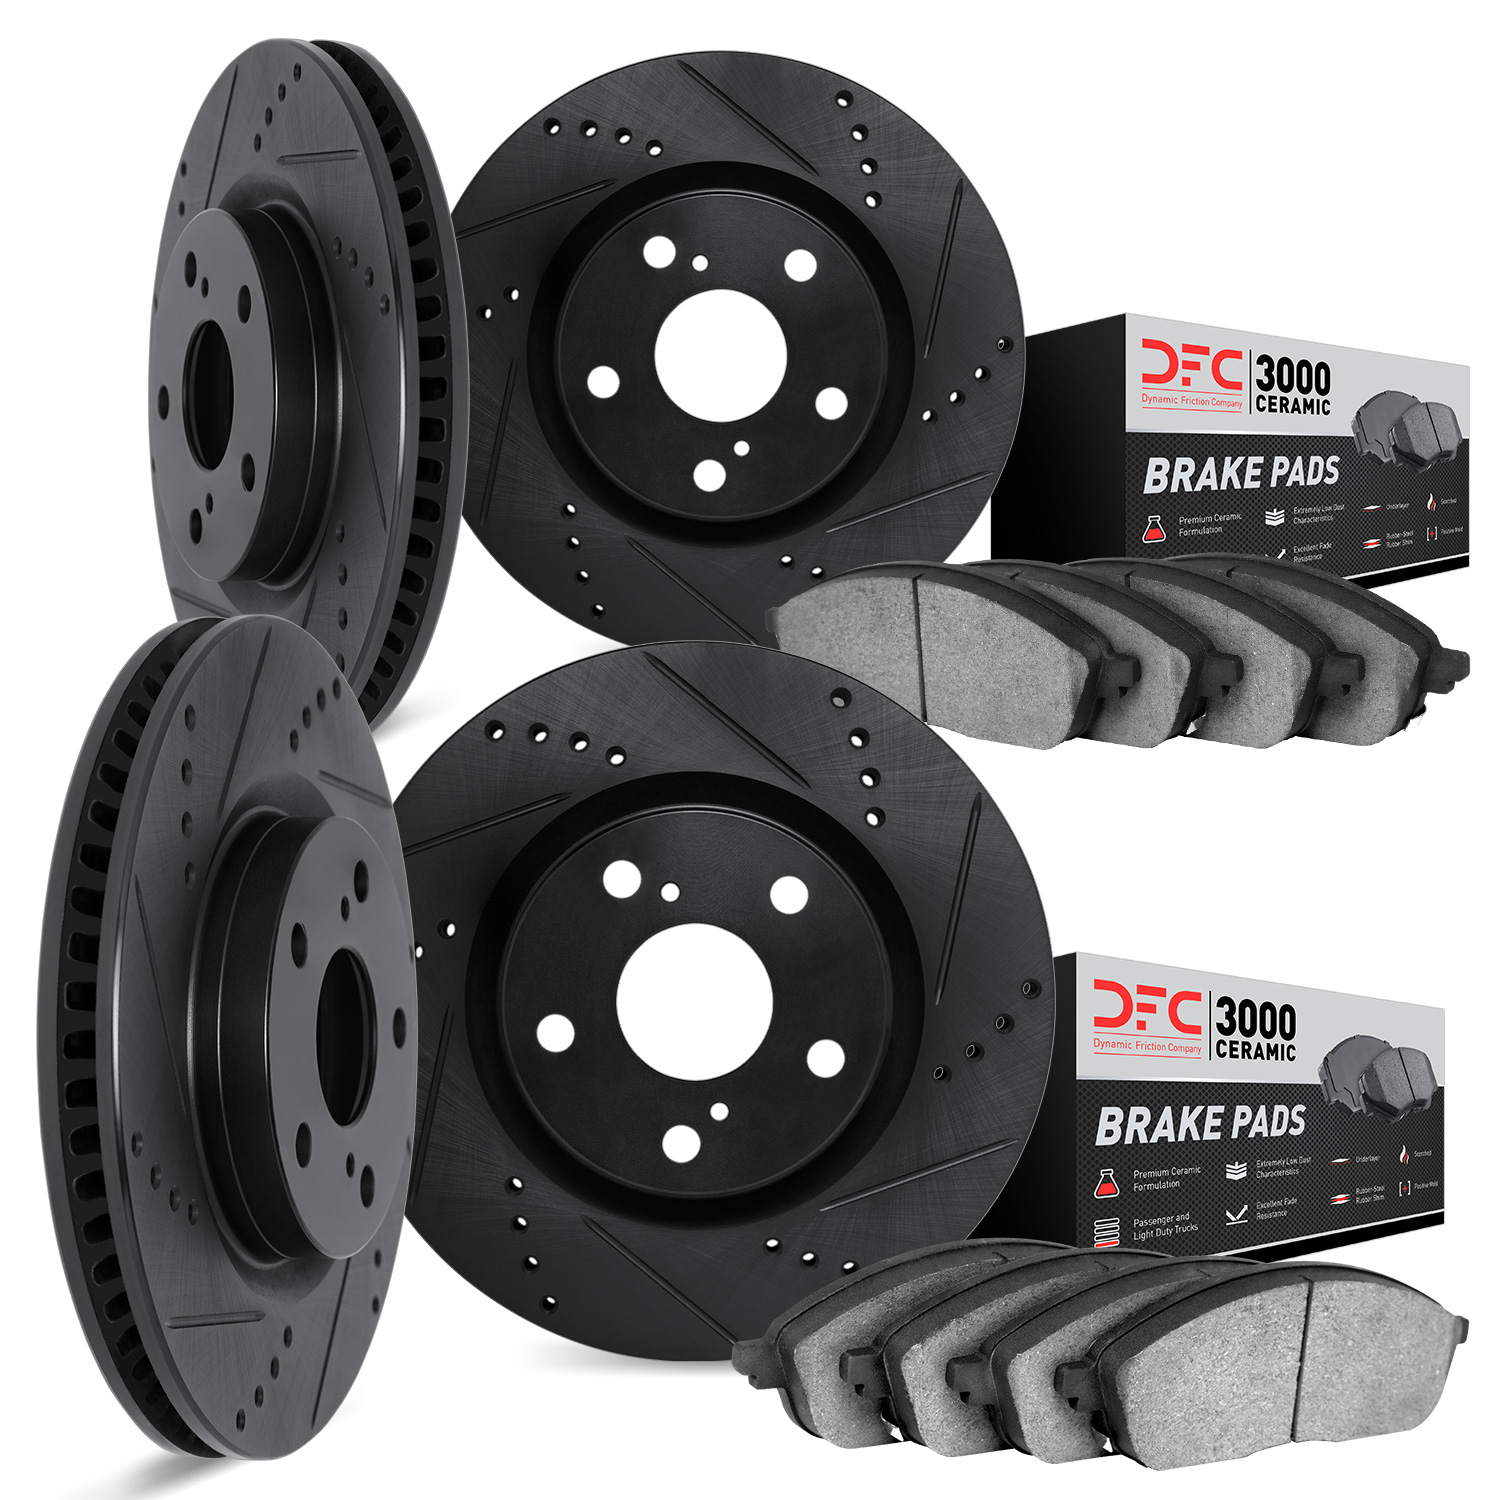 8304-31076 Drilled/Slotted Brake Rotors with 3000-Series Ceramic Brake Pads Kit [Black], 2010-2017 BMW, Position: Front and Rear